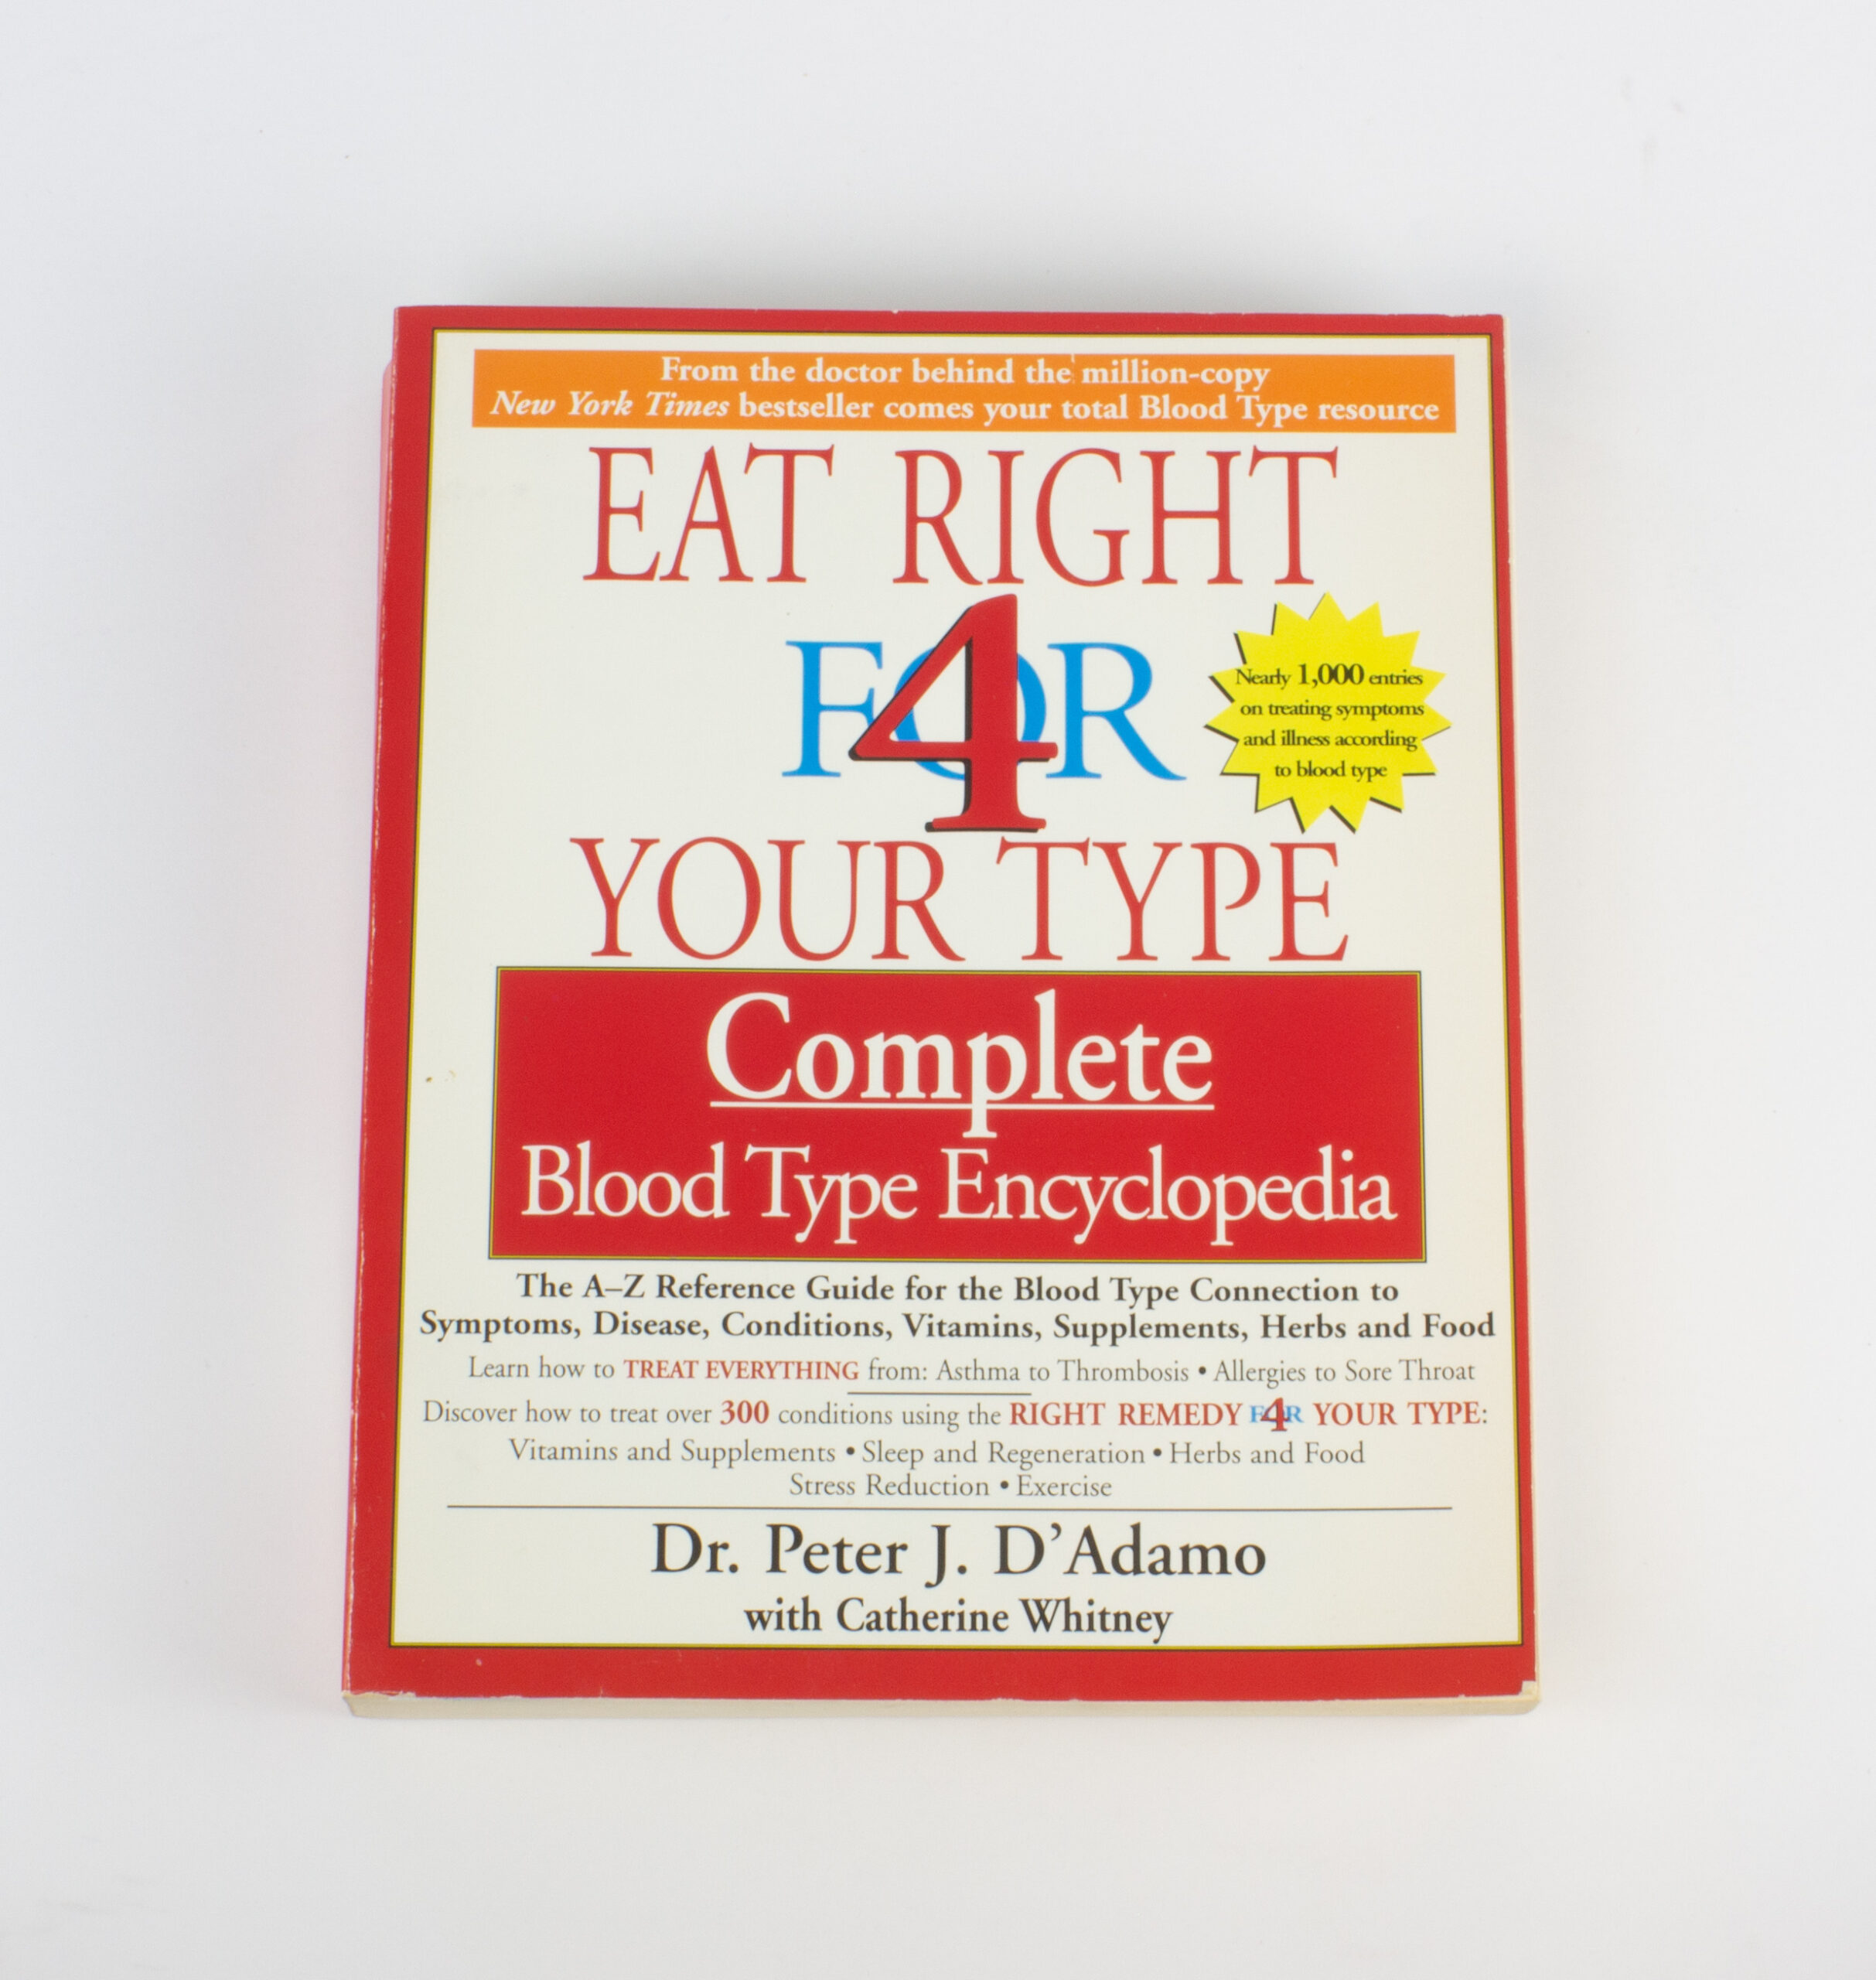 eat right for your blood type